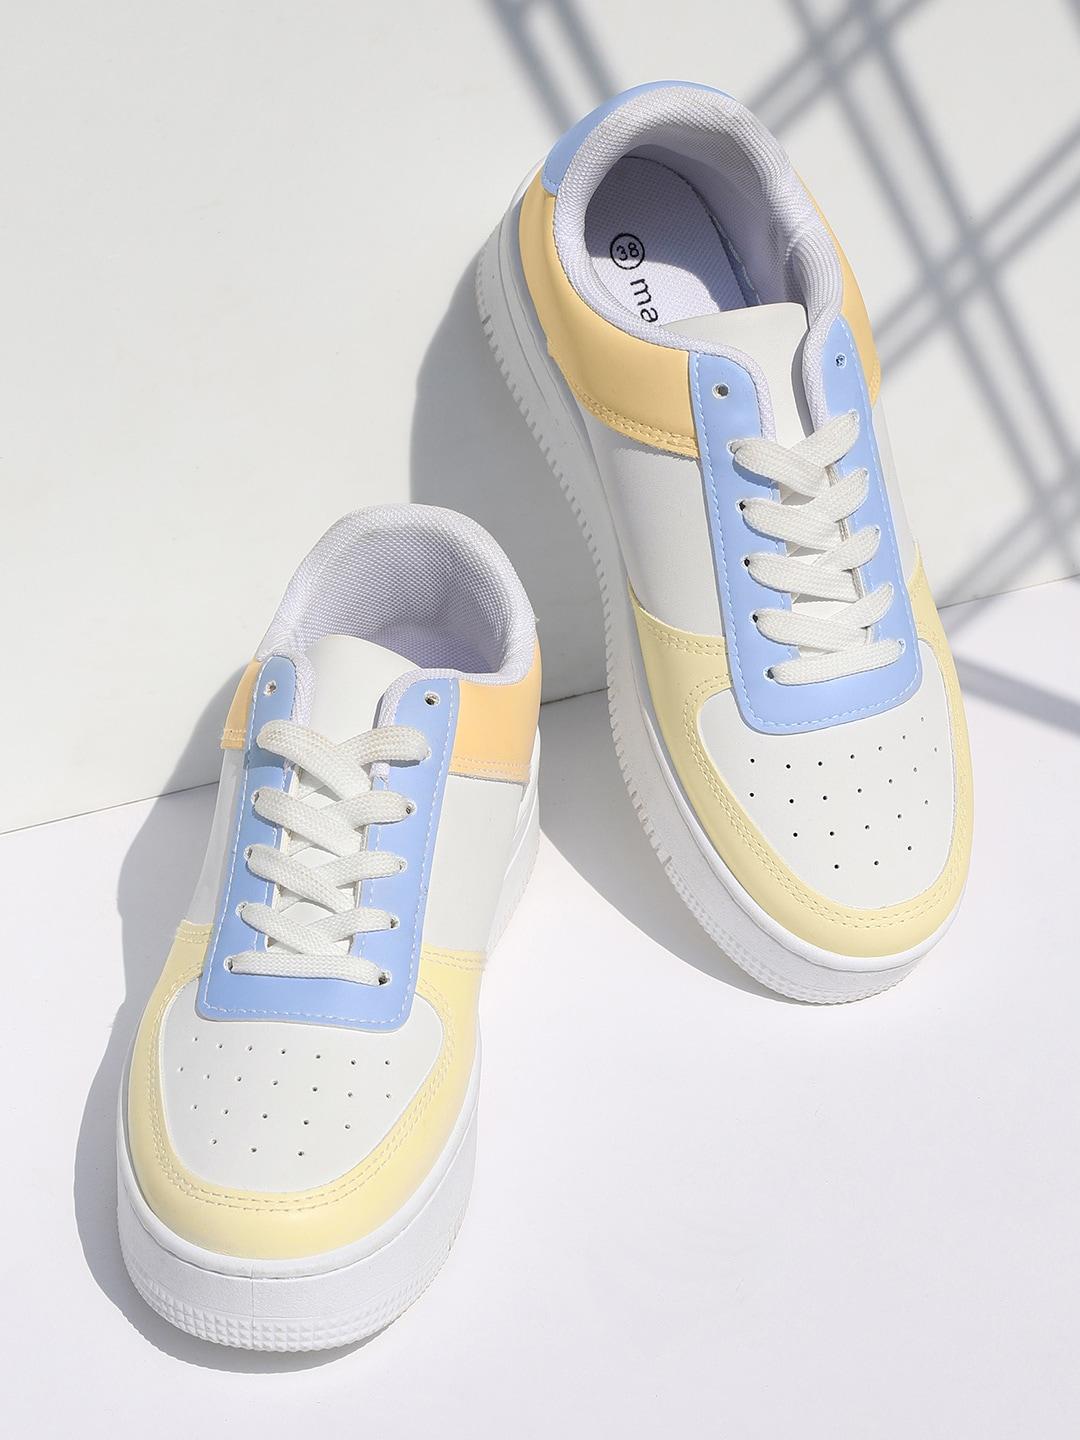 max-women-sun-reactive-colour-changing-sneakers